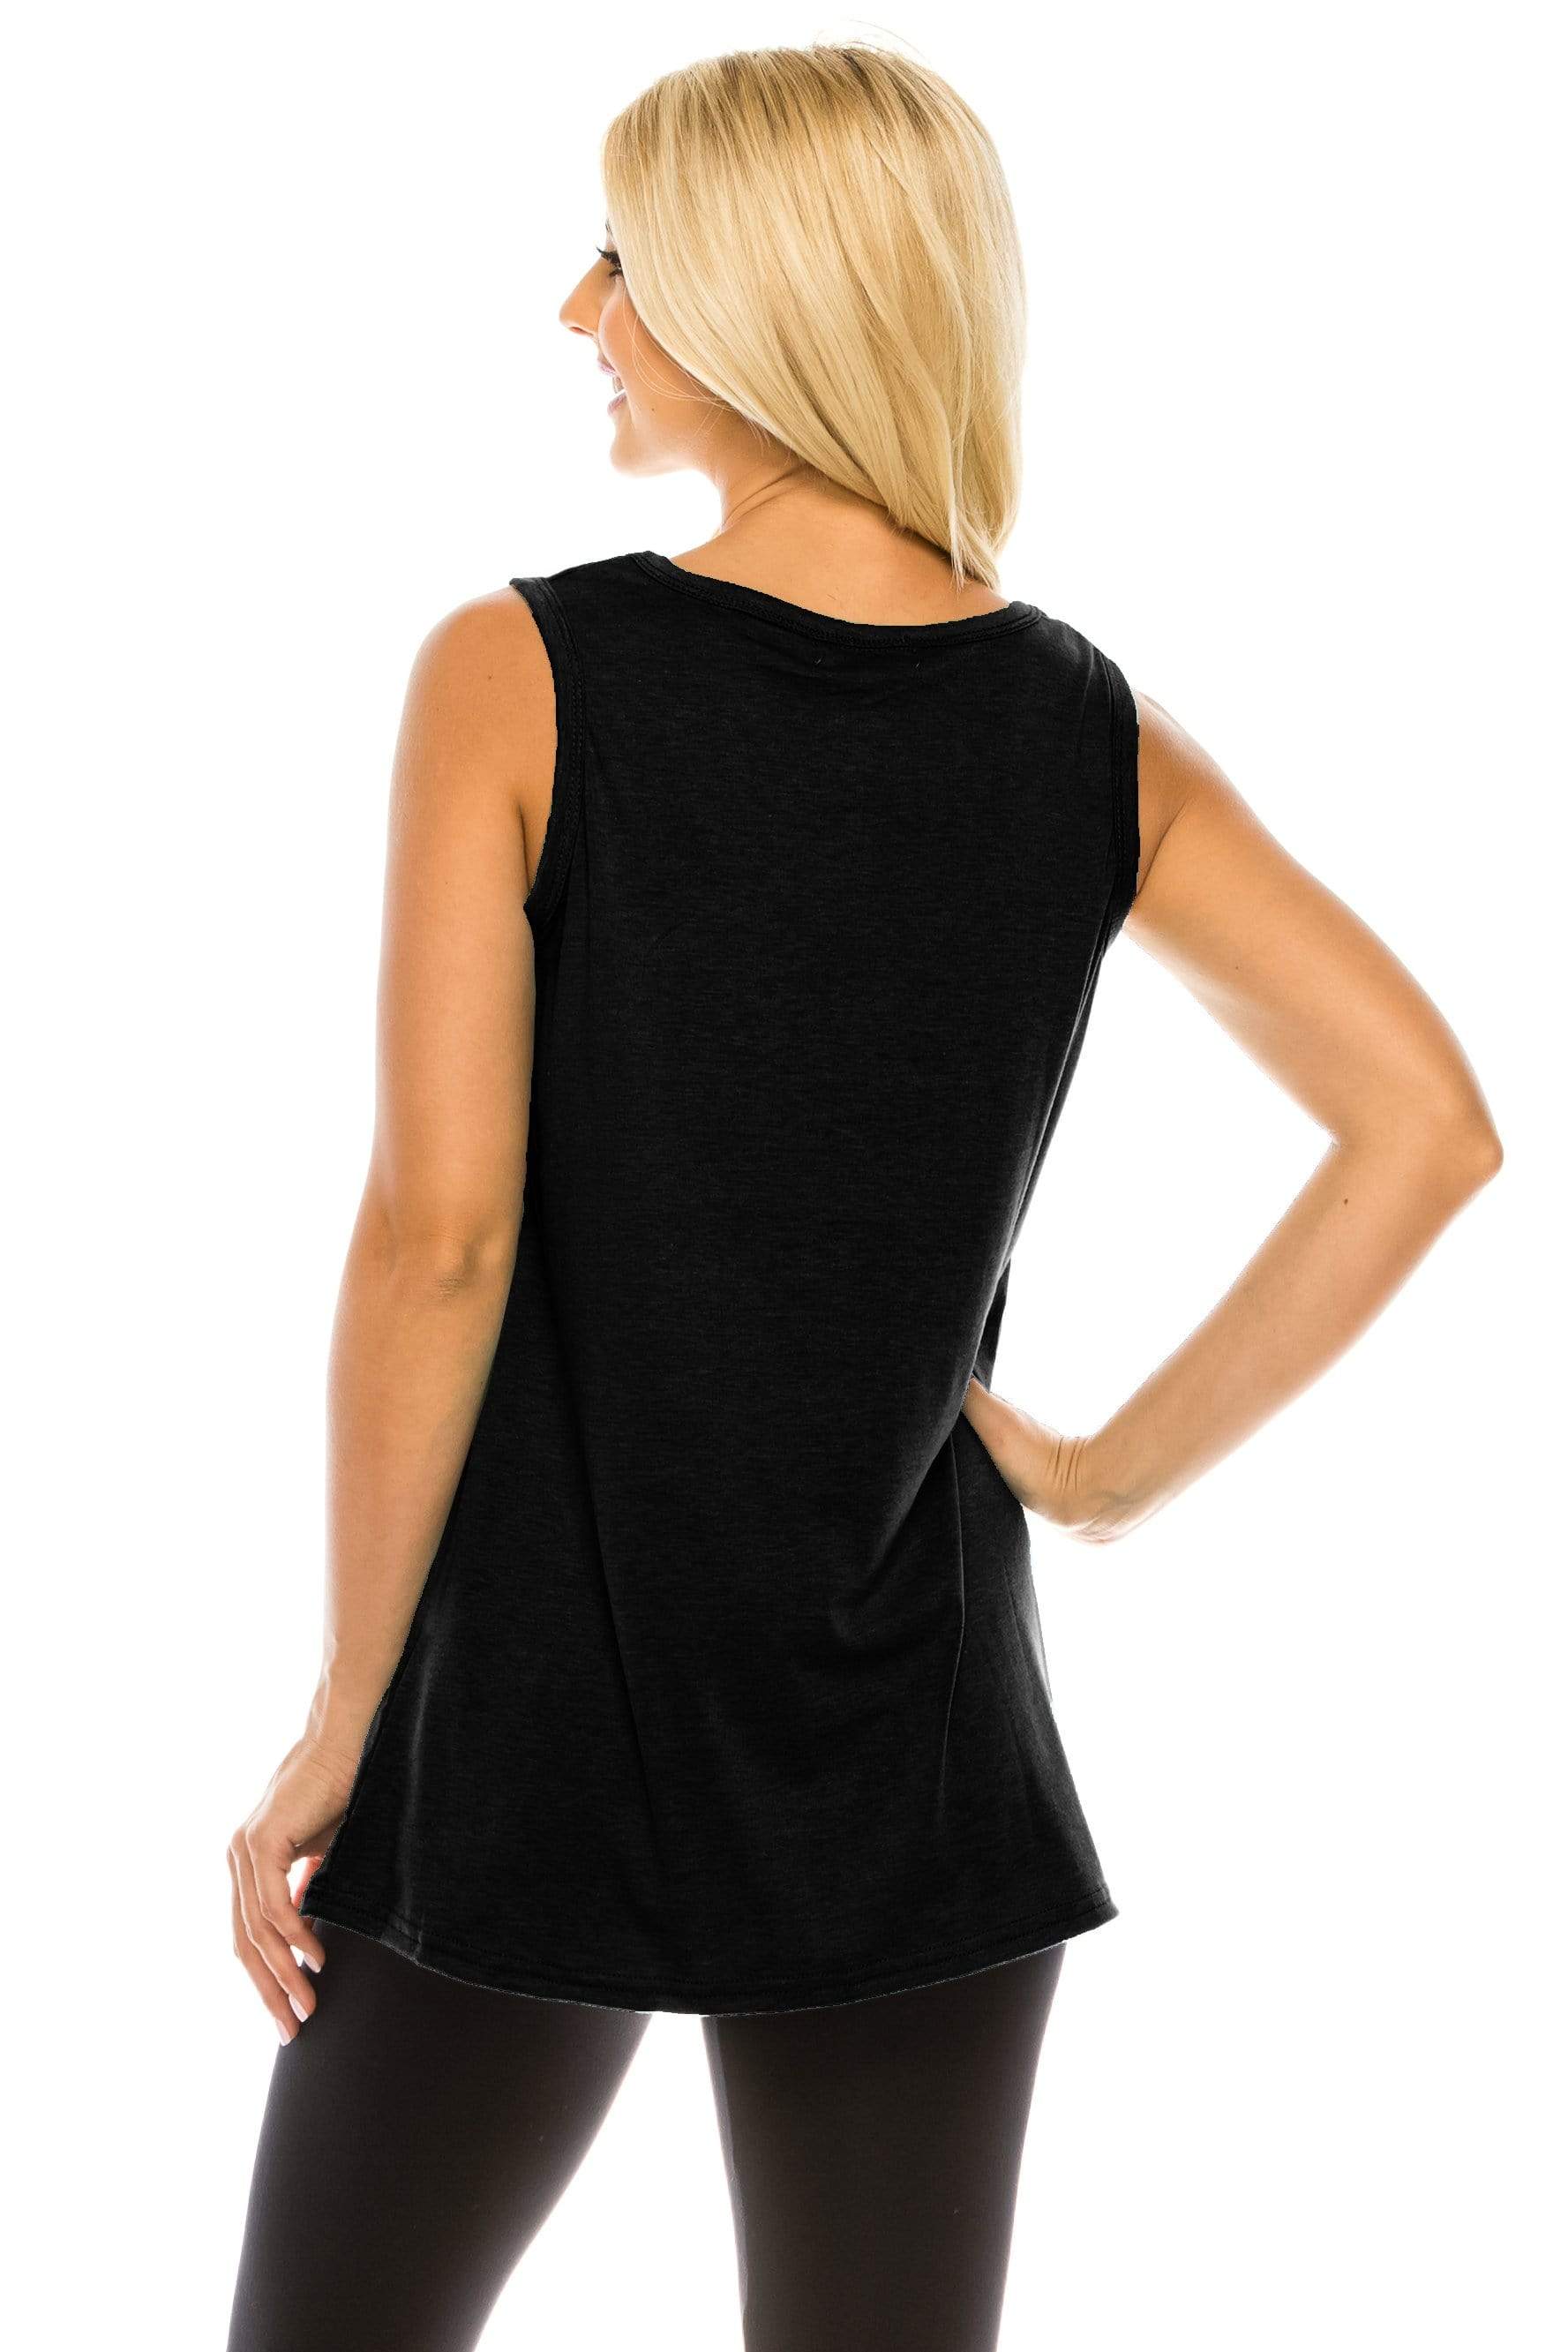 Haute Edition Women's Vacay Mode Loose Fit Tank top. Plus size availab